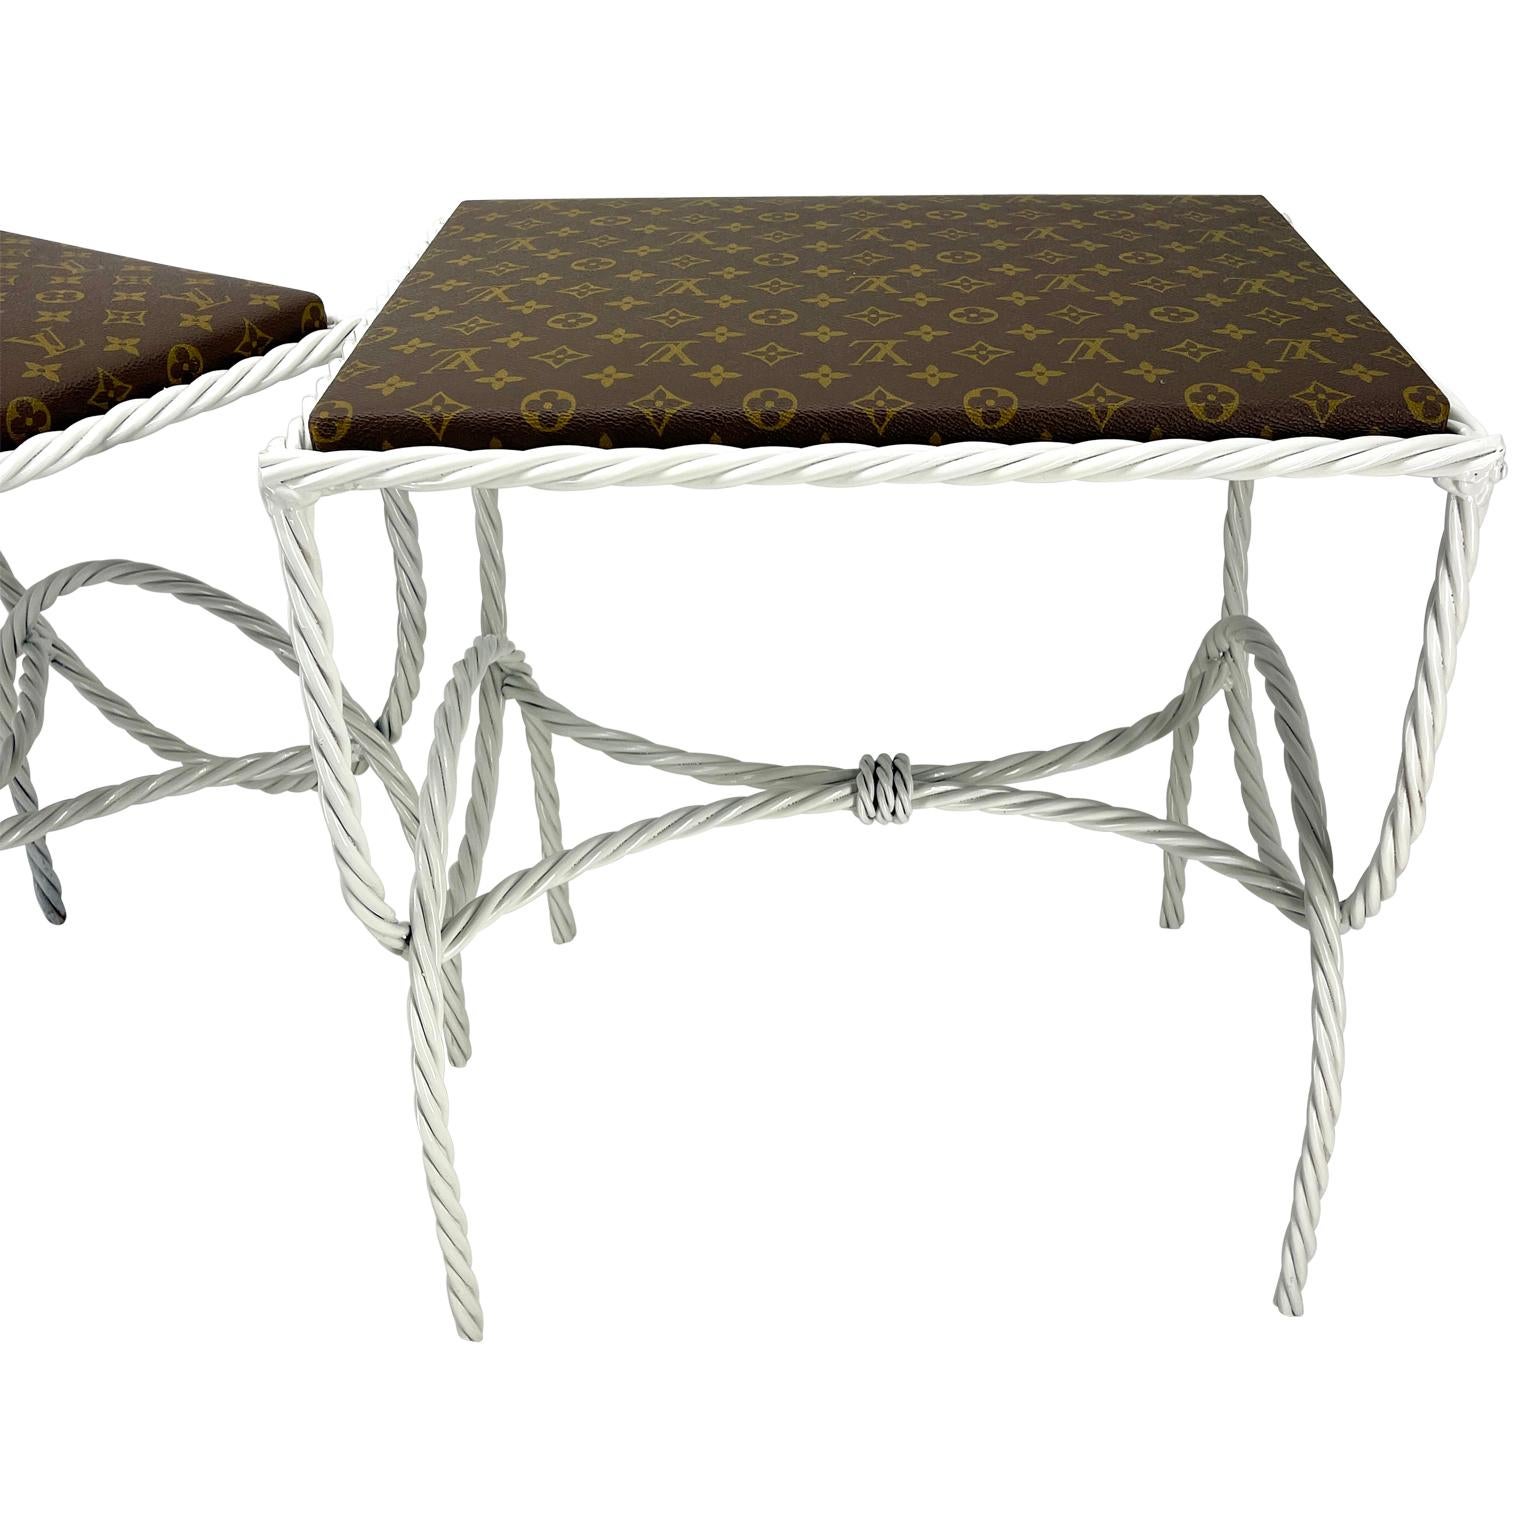 Pair of Roped Iron Benches Side Tables with Louis Vuitton Monogram Fabric For Sale 1